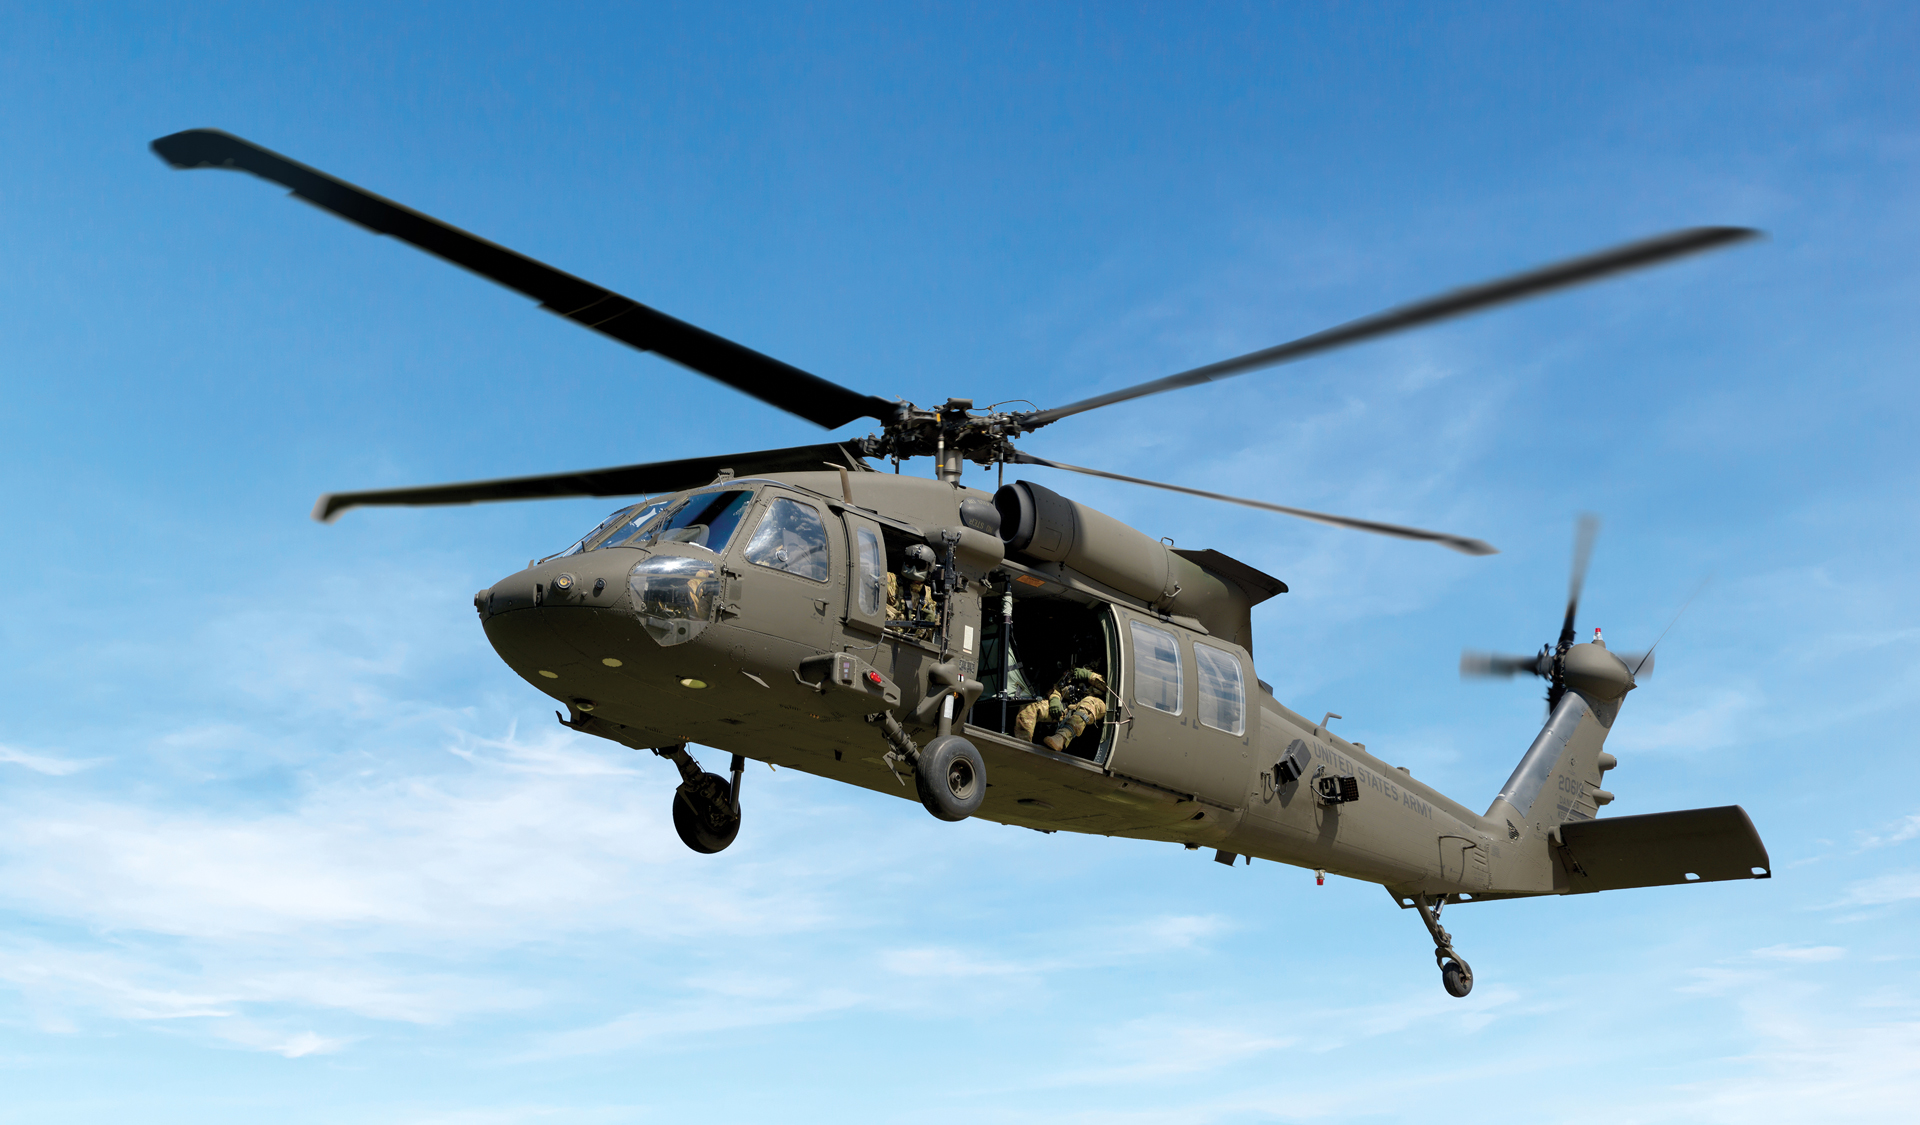 Government of Australia to acquire 40 UH-60M Black Hawks, which are built and produced by Sikorsky, a Lockheed Martin company. (Photo: Lockheed Martin)